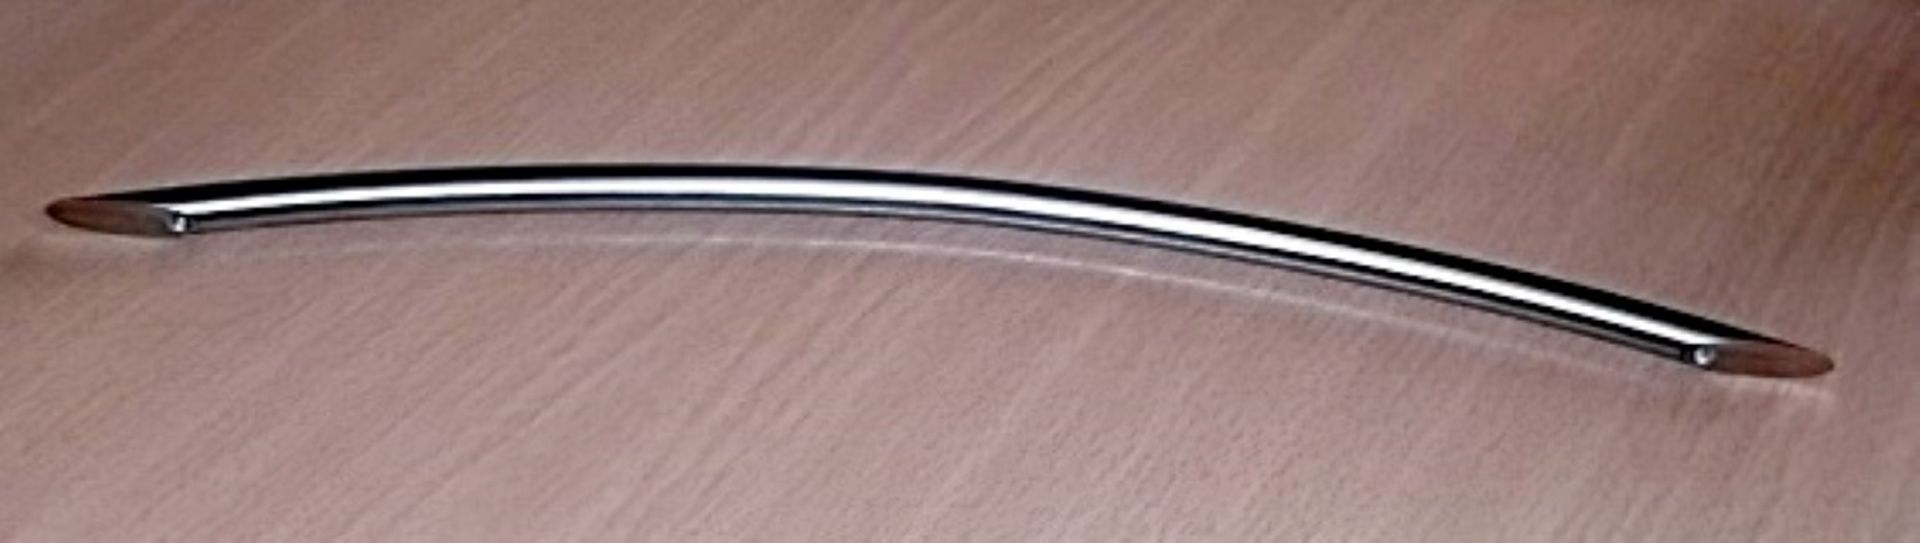 400 x BOW Handle Kitchen Door Handles By Crestwood - 320mm - New Stock - Brushed Nickel Finish - - Image 6 of 11